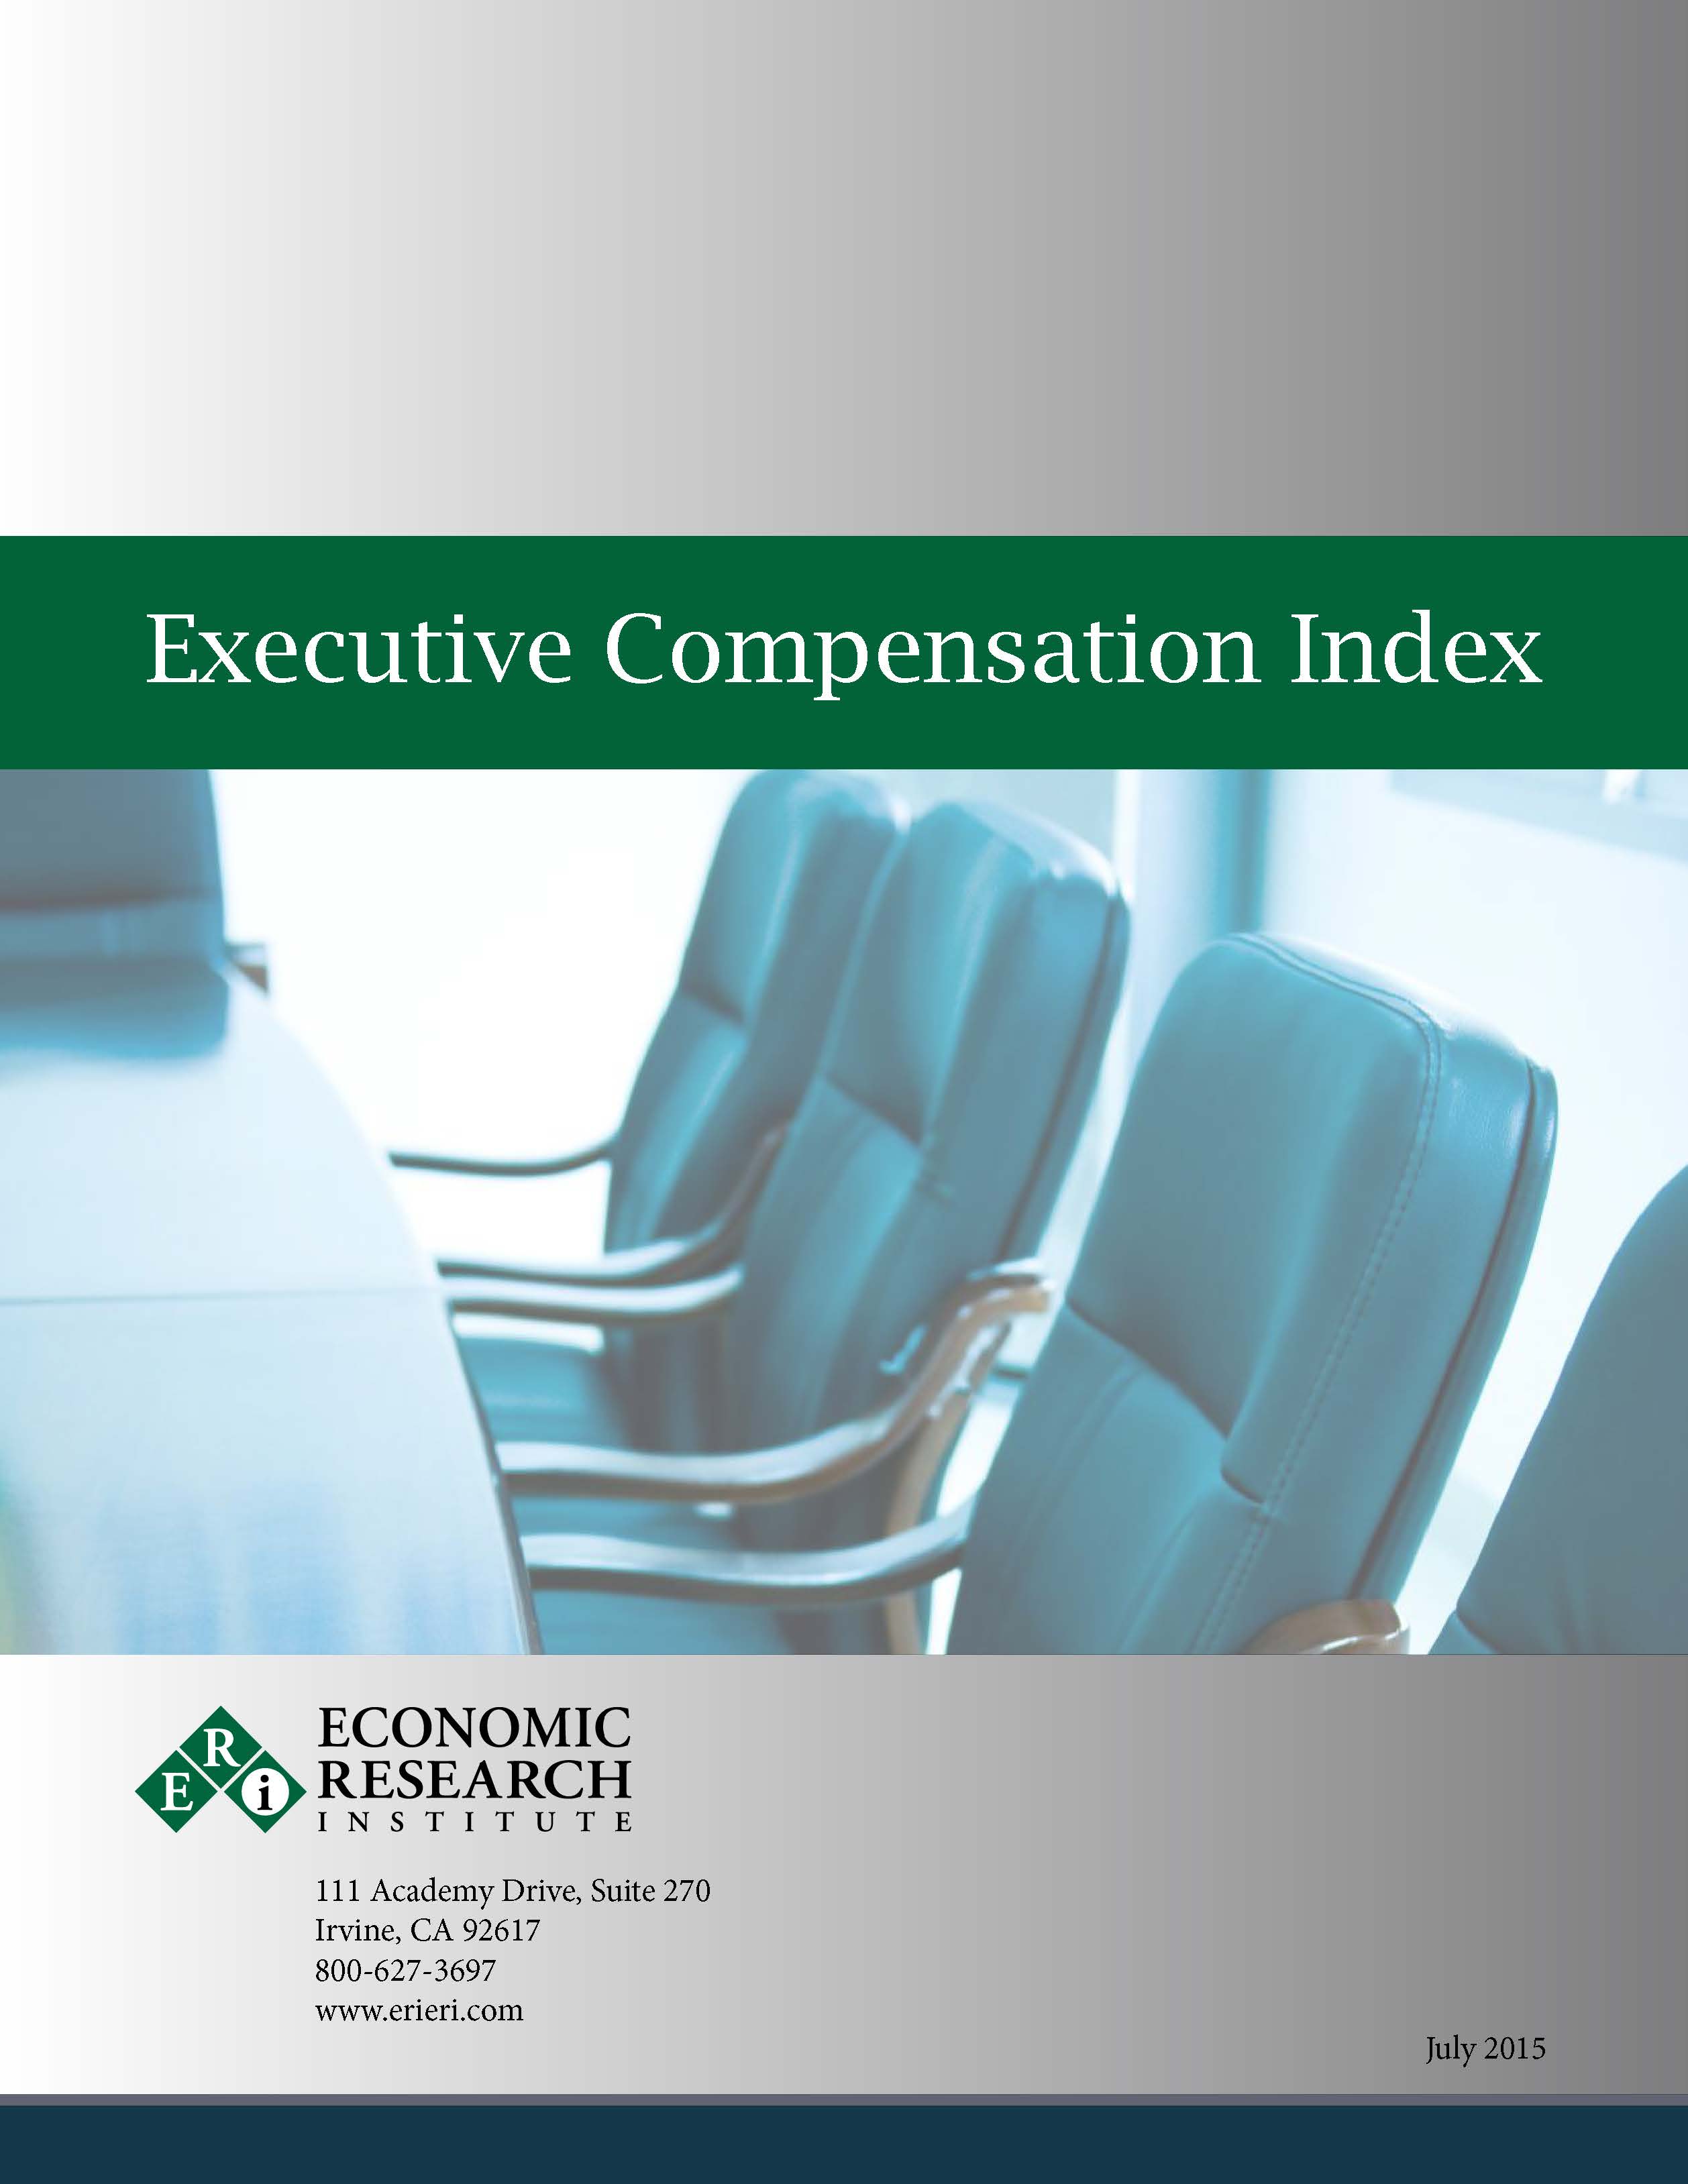 Executive Compensation Index July 2015-1_Page_01